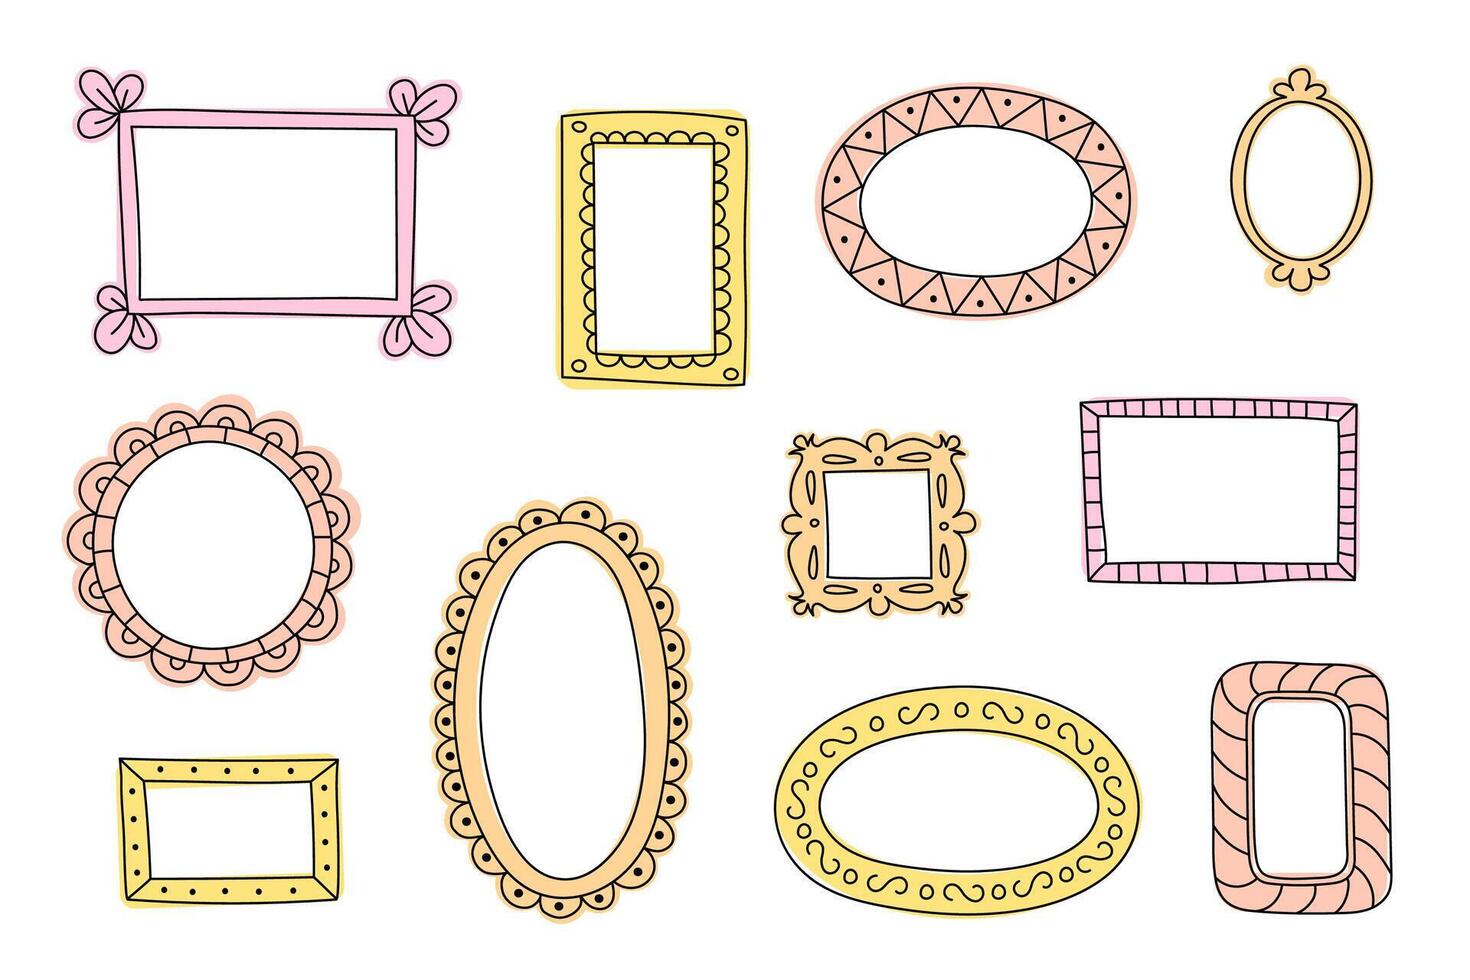 A set of hand-drawn minimalist mirror doodles. Girly vector photo frames of different shapes and colors, decorative border.